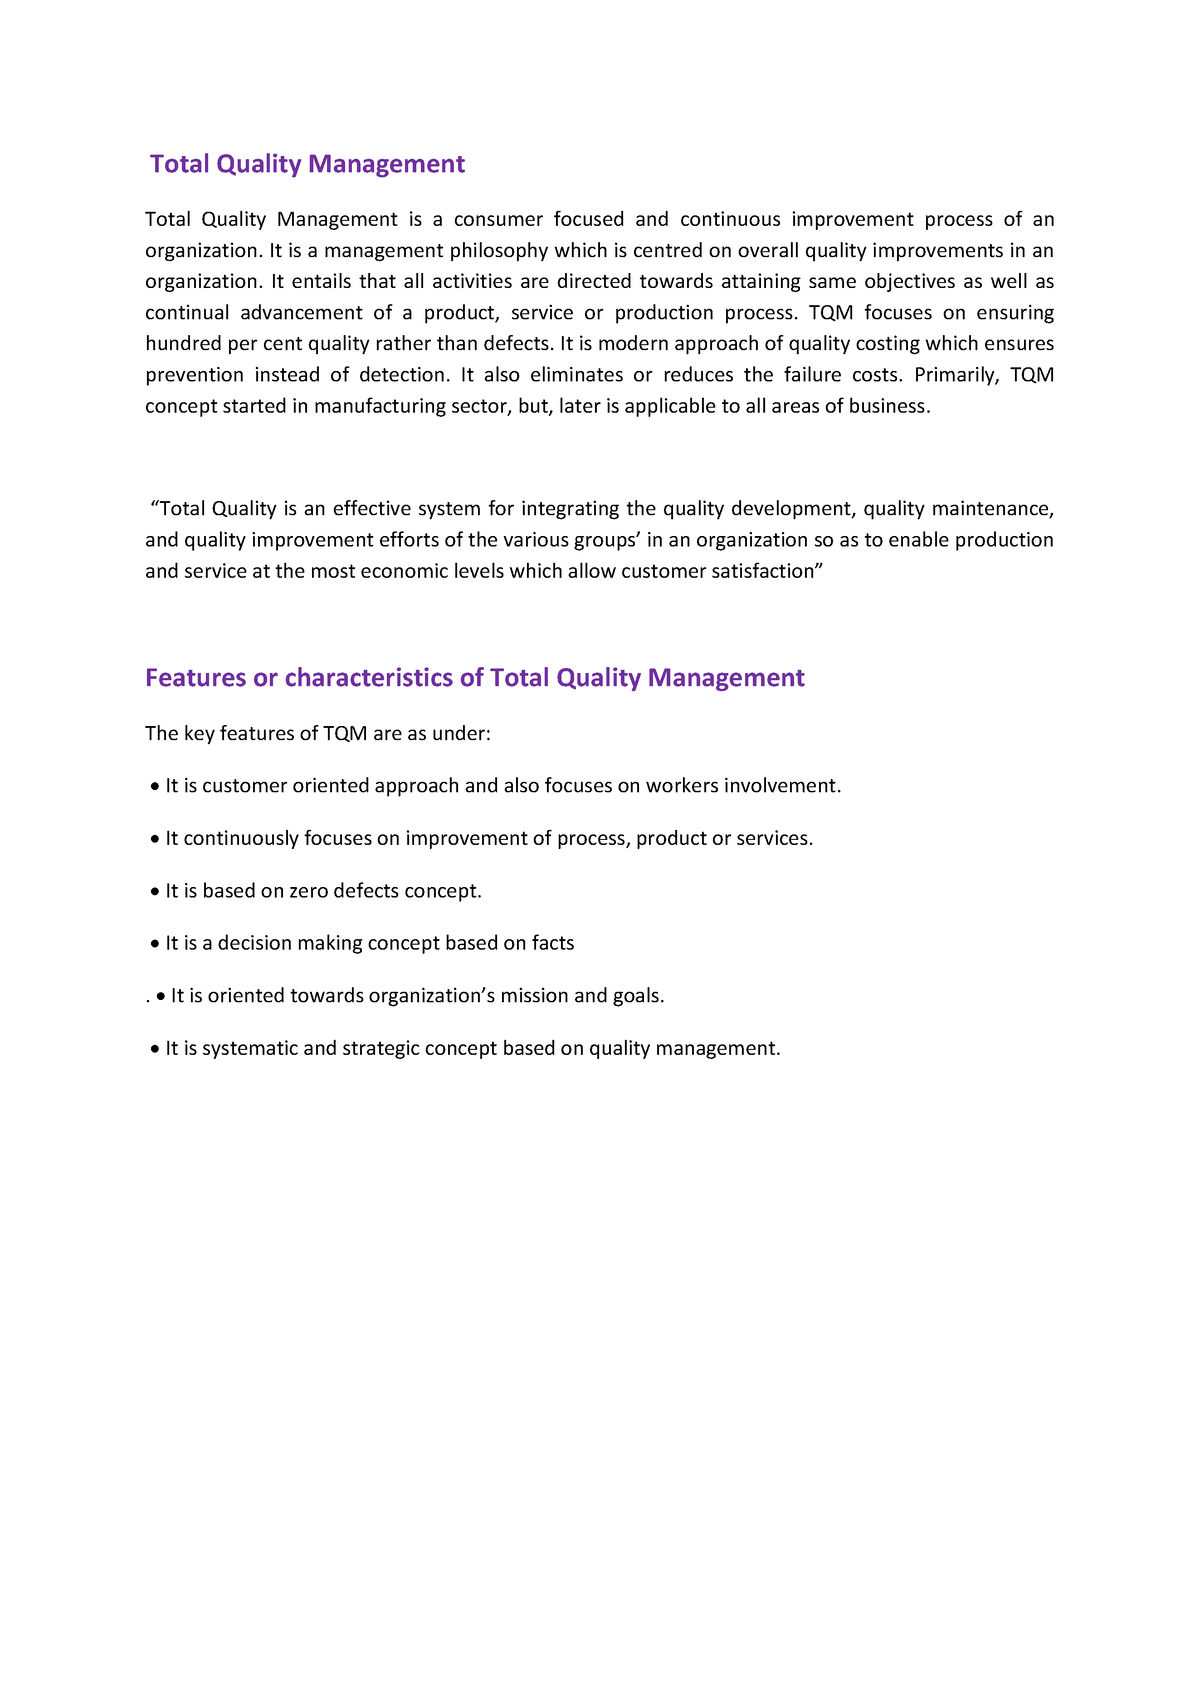 thesis topics on quality management